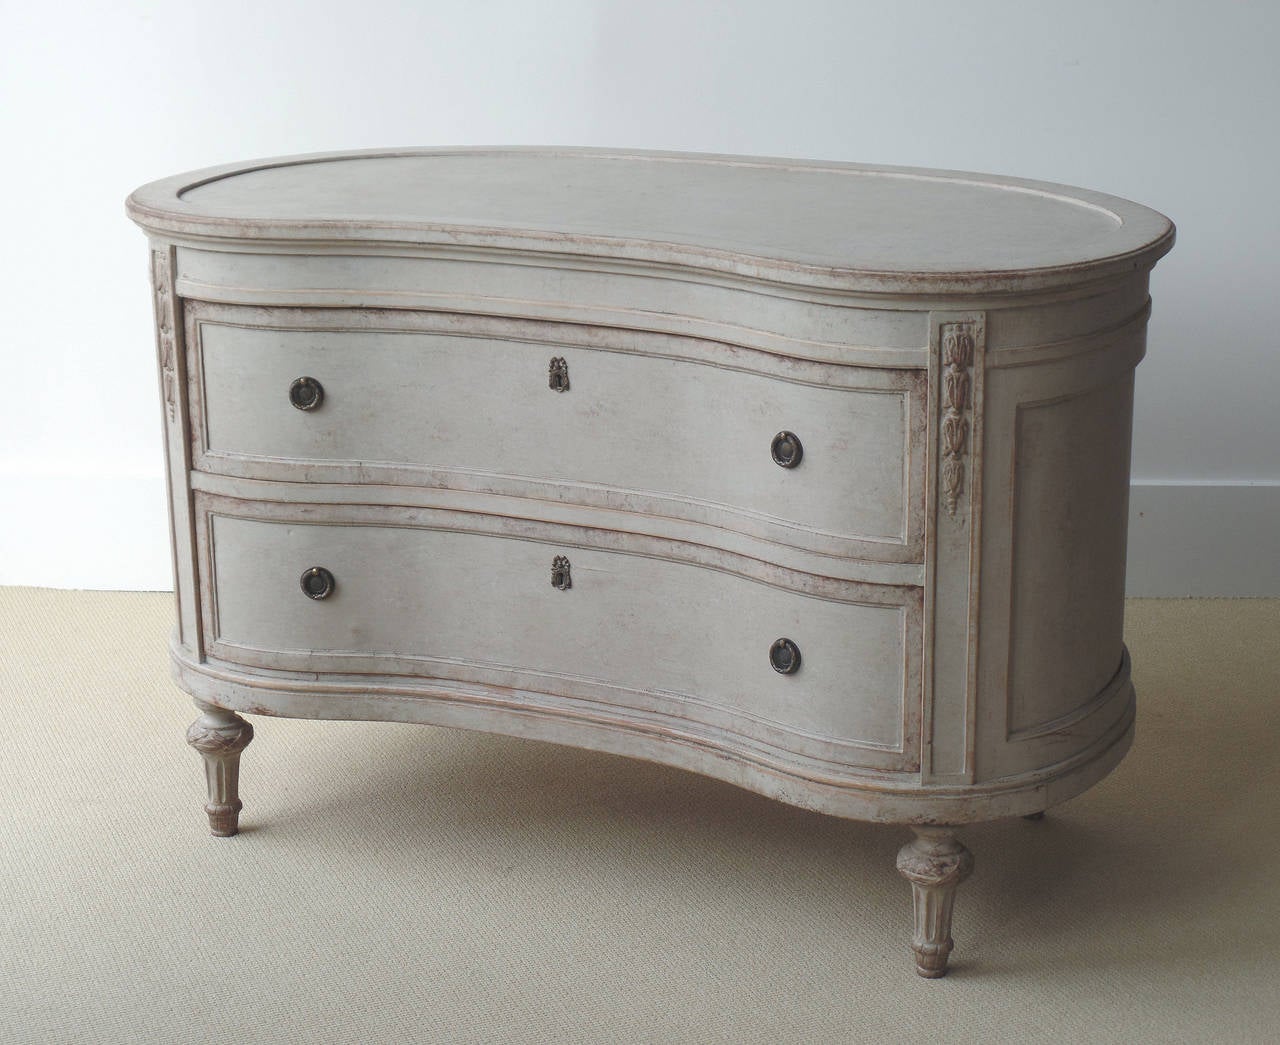 Danish painted kidney-shaped freestanding chest with paneled top, sides and back, two drawers, applied decorations, and turned feet with fluting and ribbon banding. Chest is finished on all sides, made to be float. Lovely sculptural form. Made by